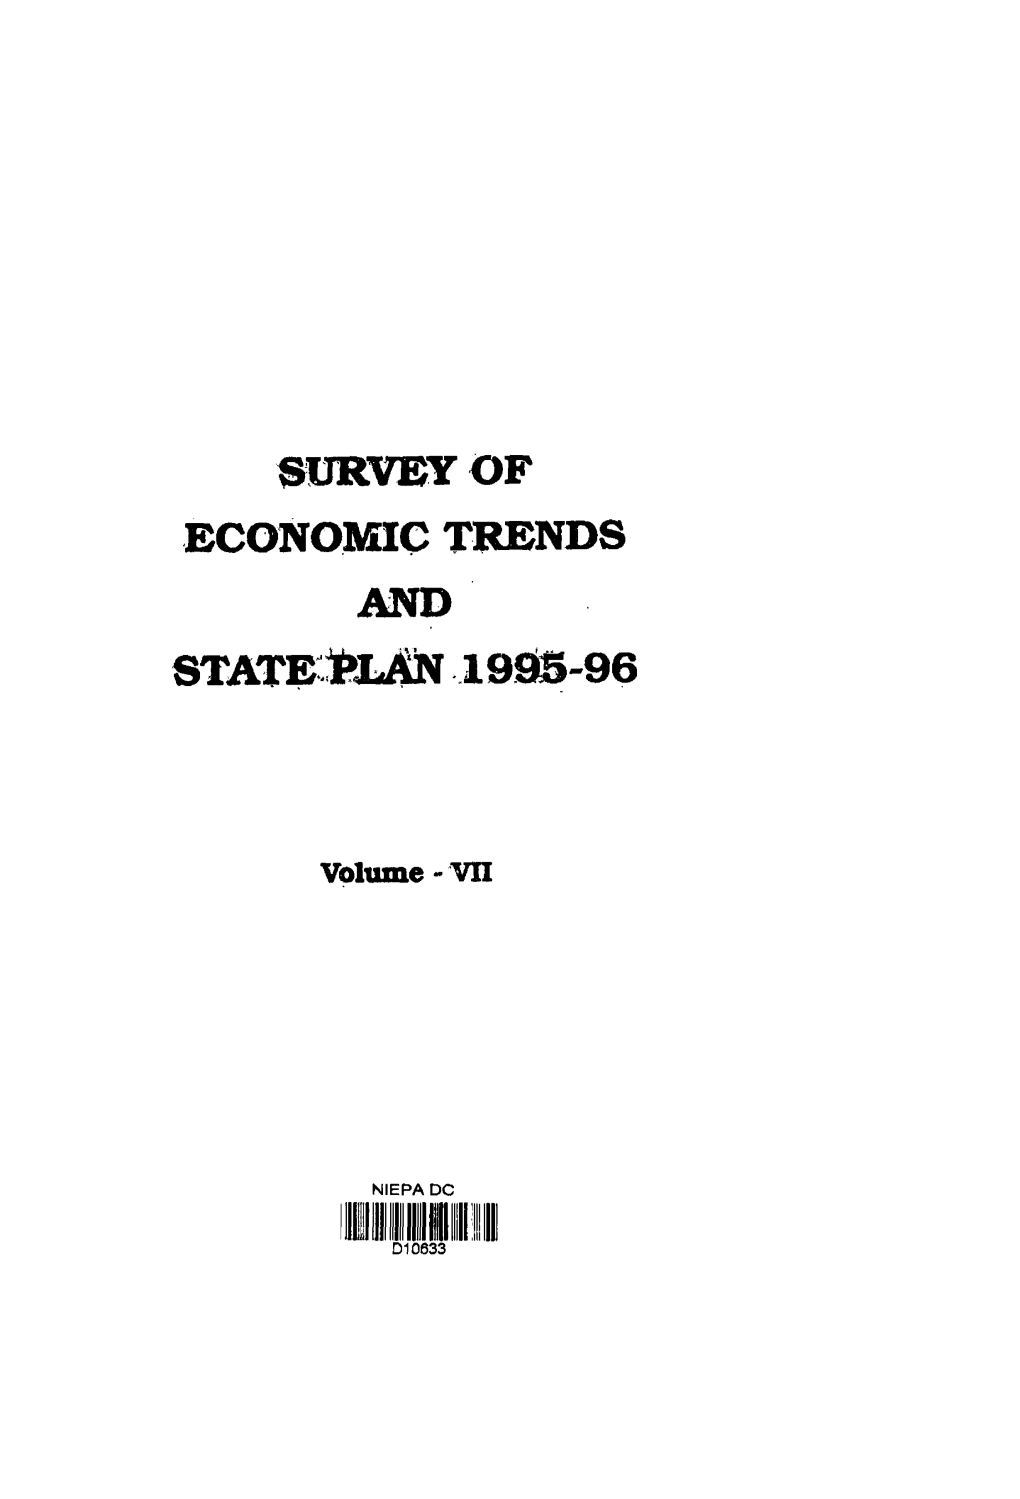 ECONOMIC TRENDS Itfld STATE::!Ftlan 19S@-96